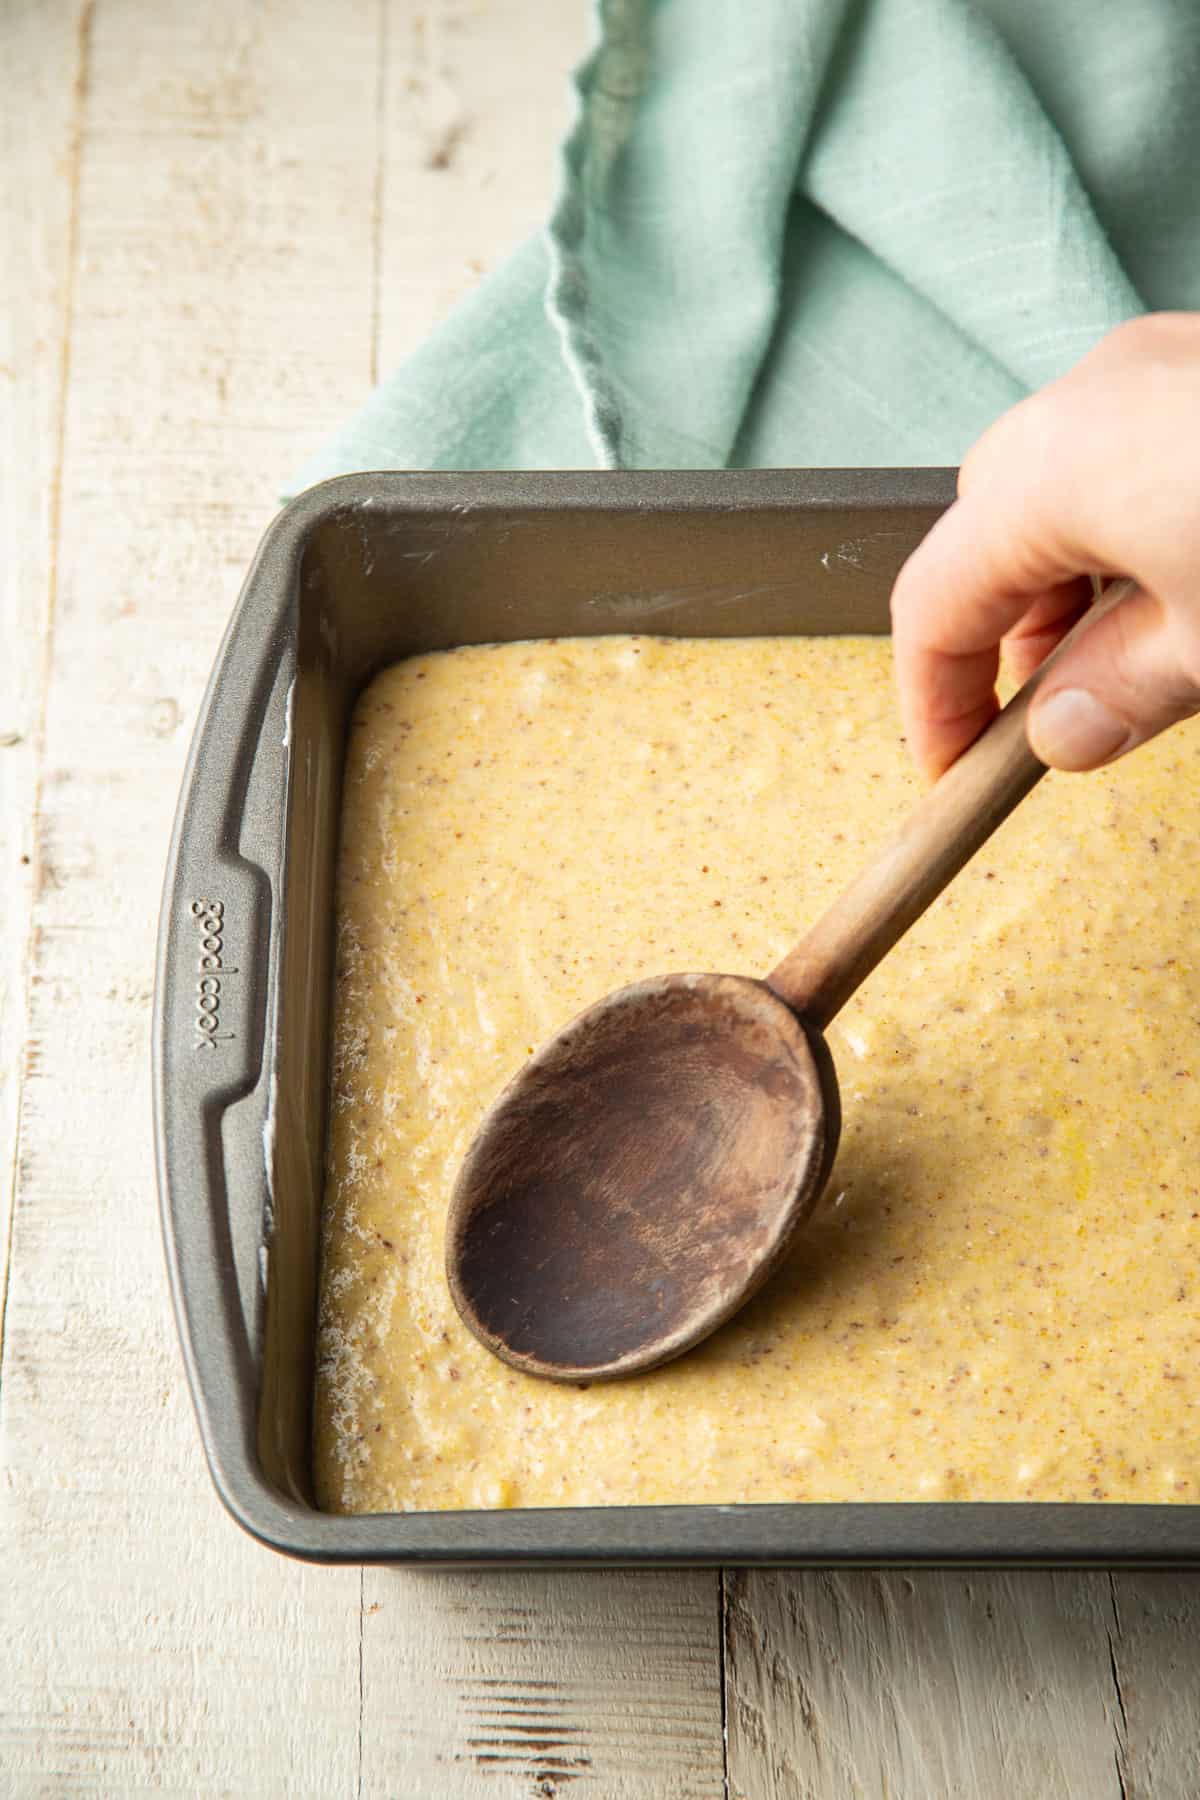 Hand using a wooden spoon to smooth Vegan Cornbread batter in a baking pan.